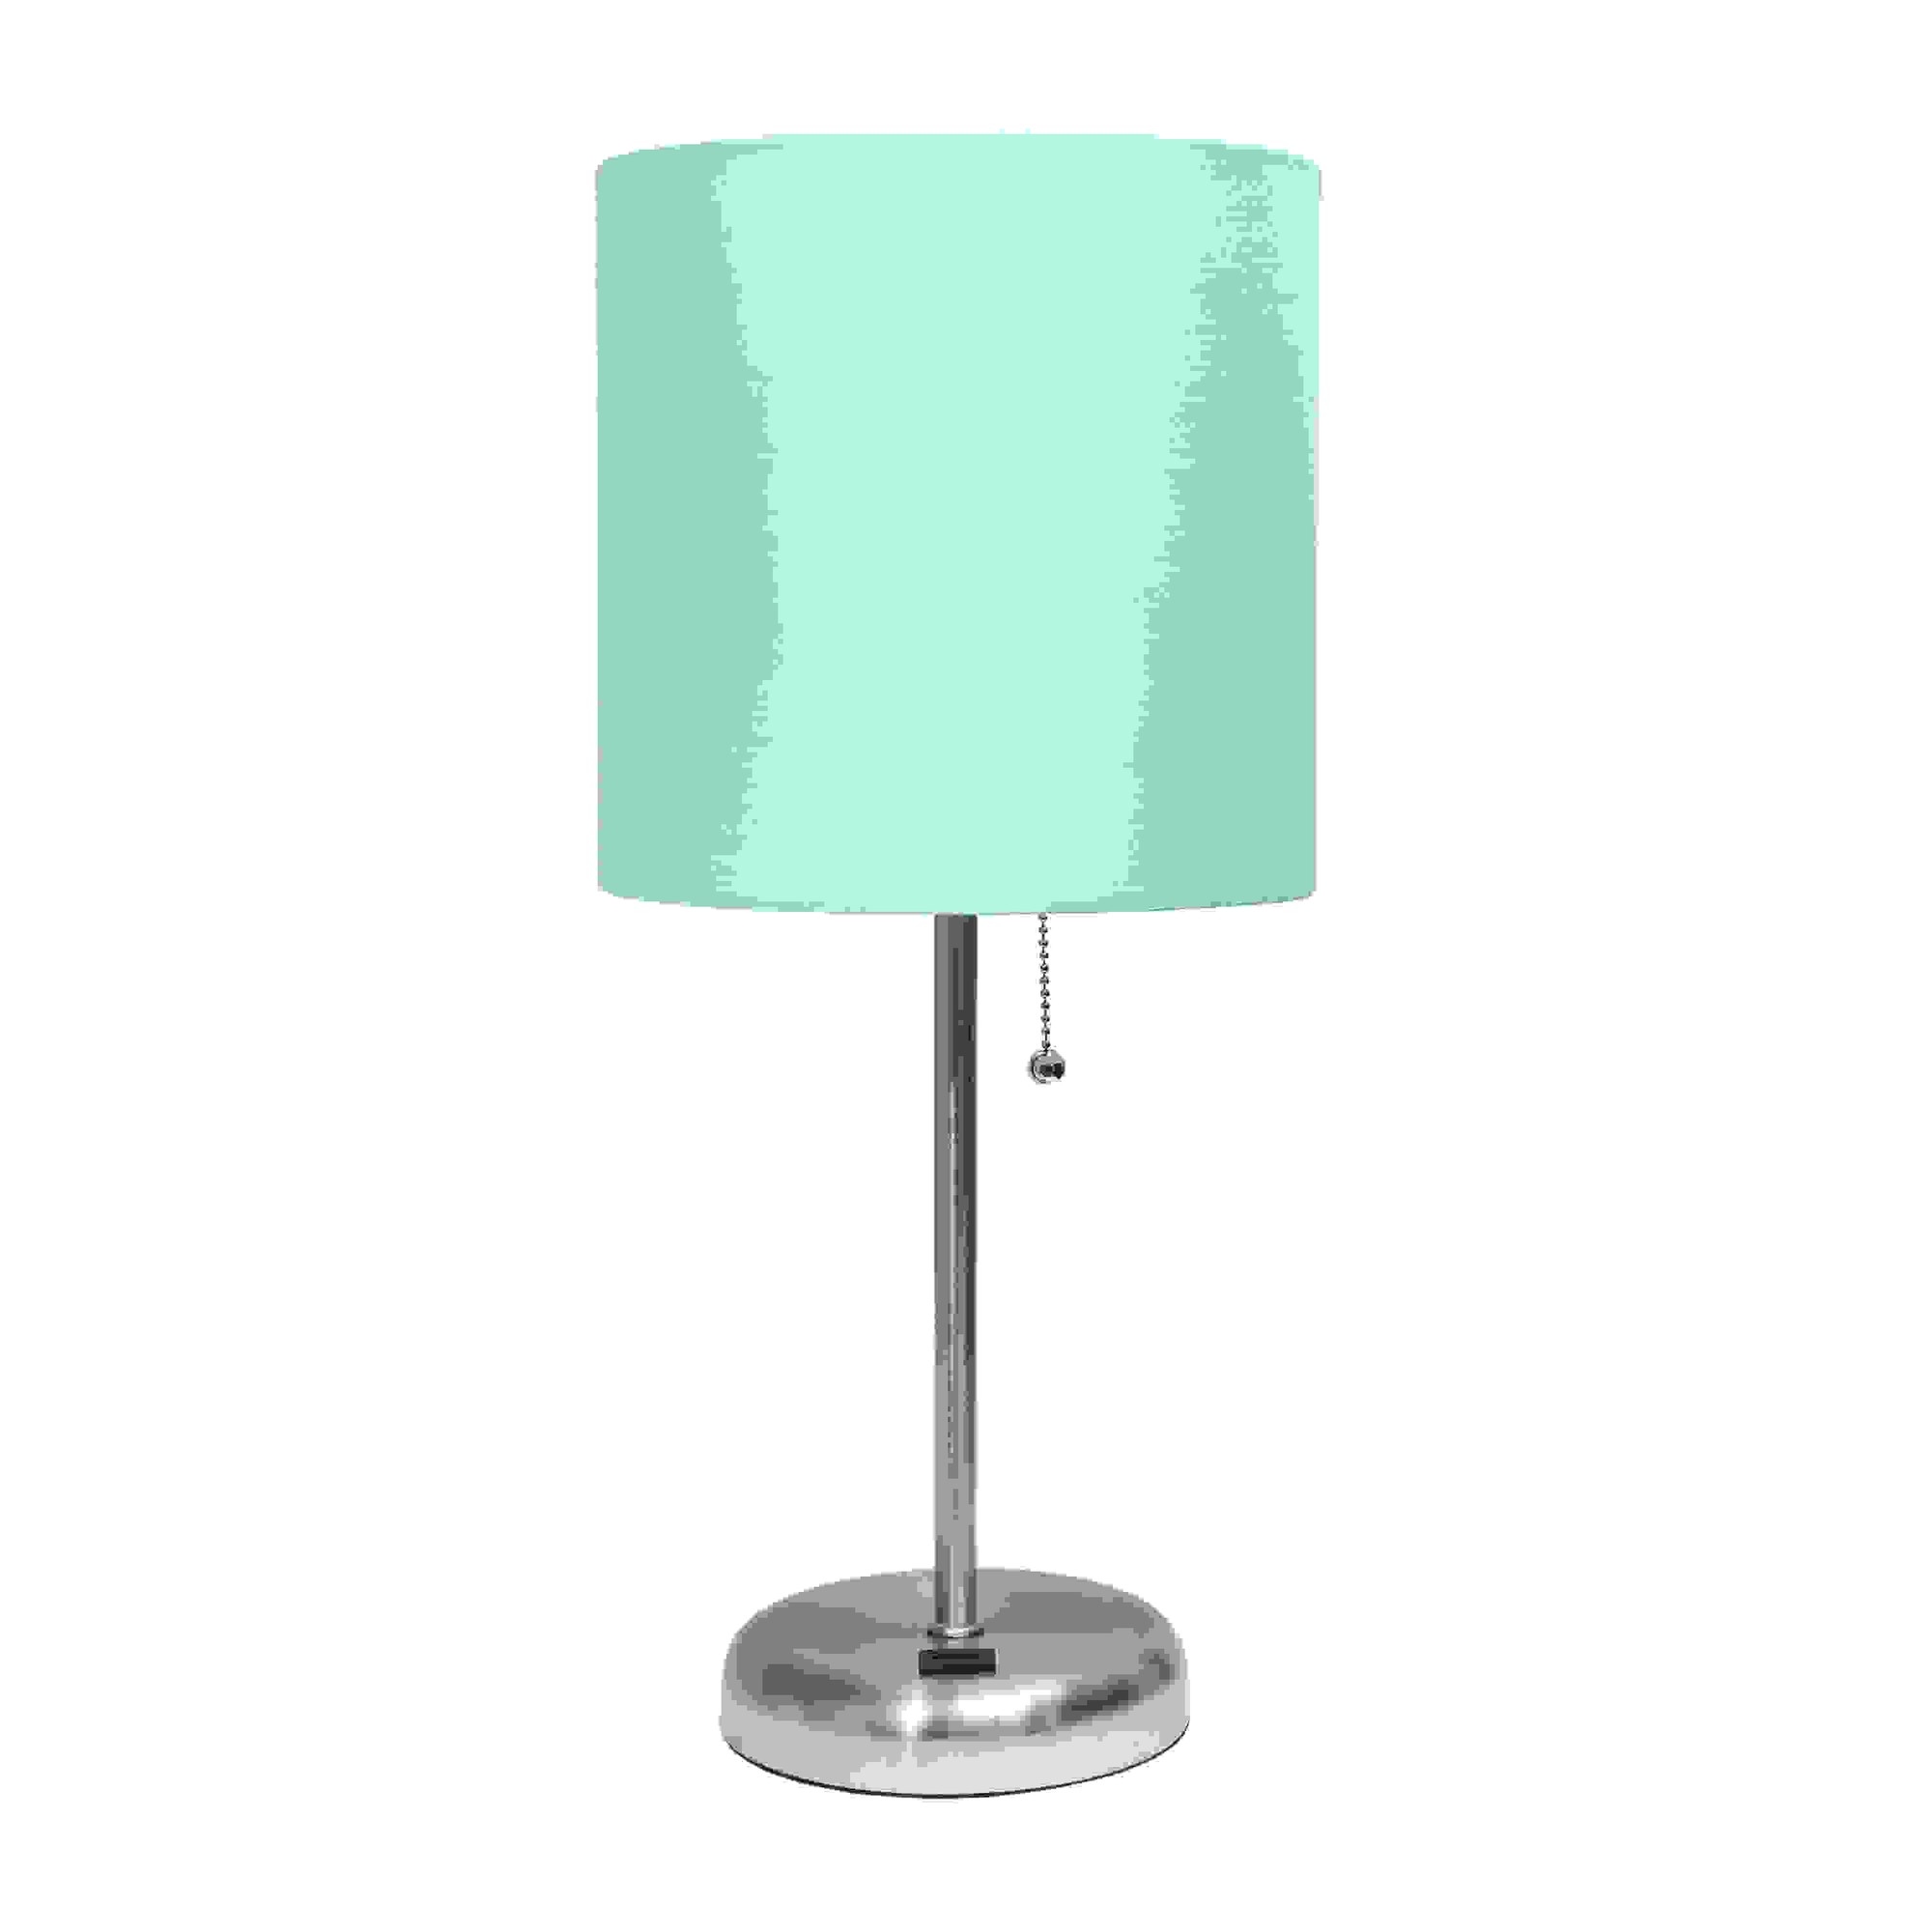 Simple Designs Stick Lamp with USB charging port and Fabric Shade, Aqua